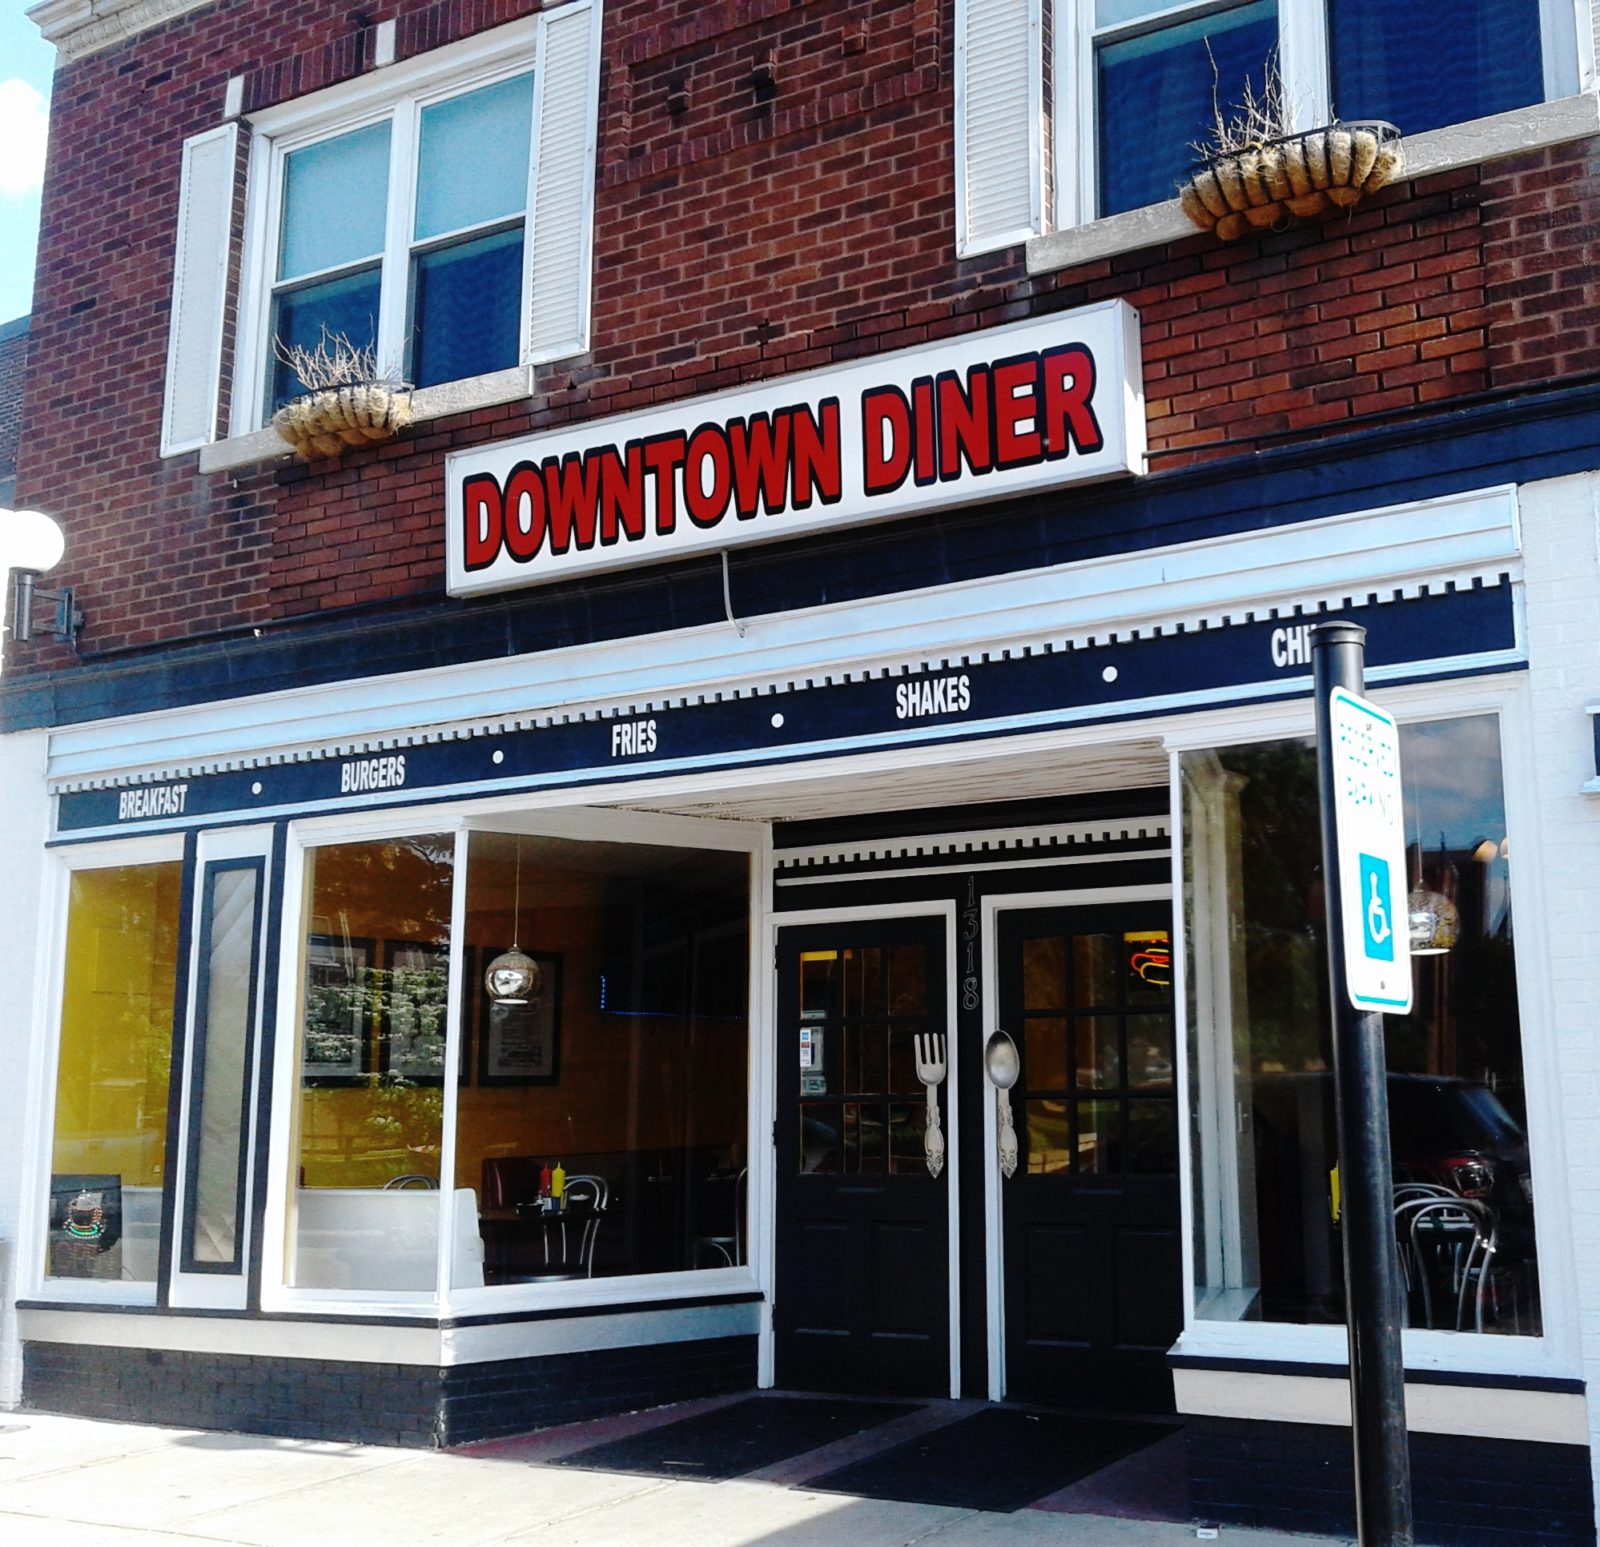 The Downtown Diner